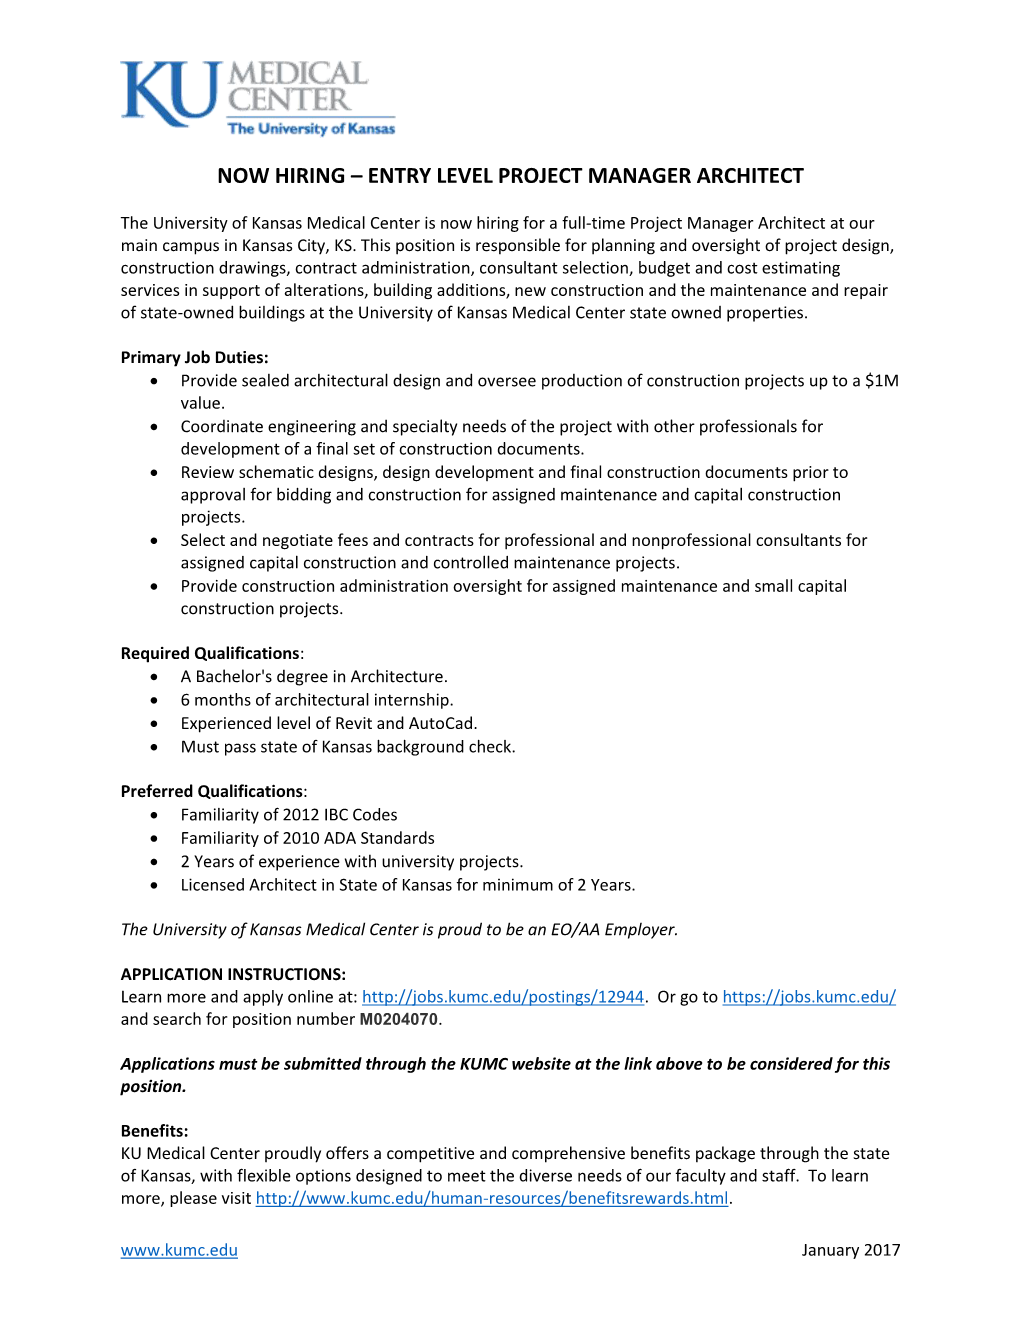 Entry Level Project Manager Architect